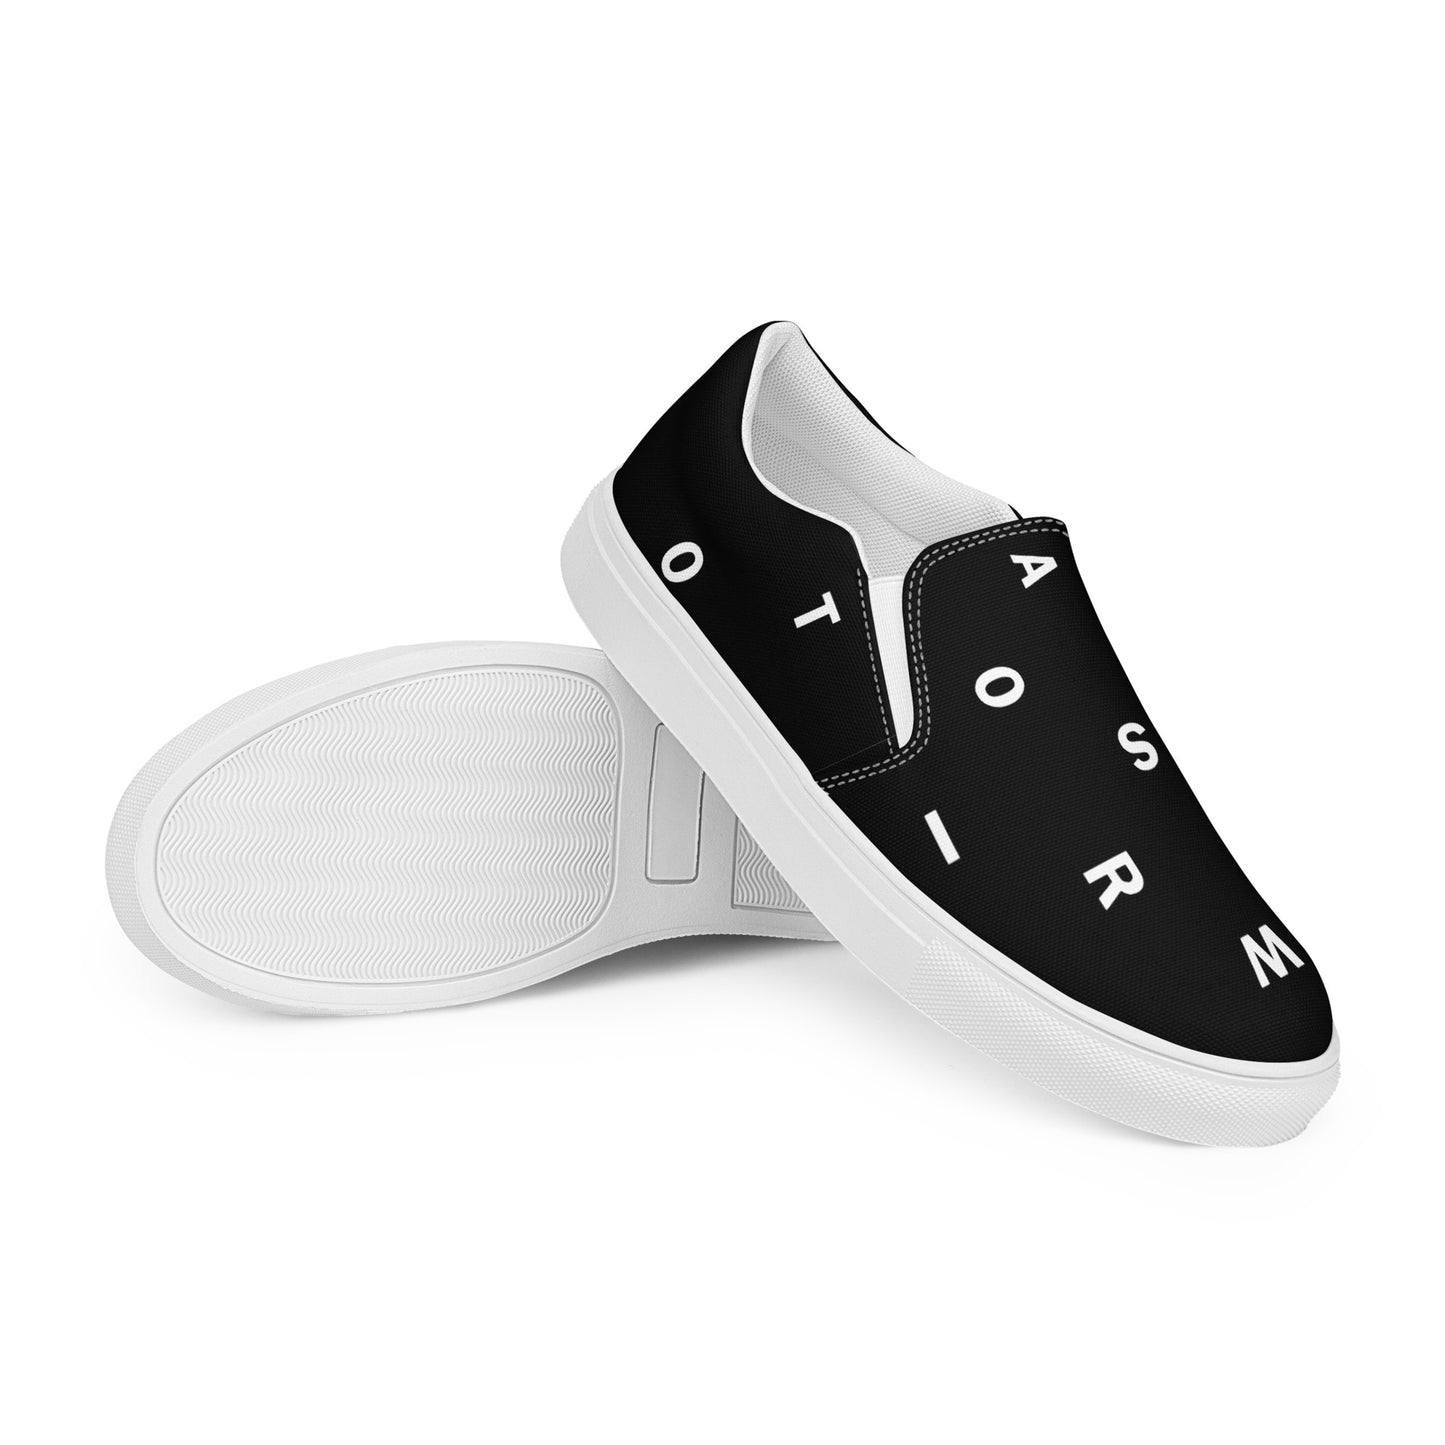 Letter Black - Inspired By Taylor Swift - Sustainably Made Women’s slip-on canvas shoes